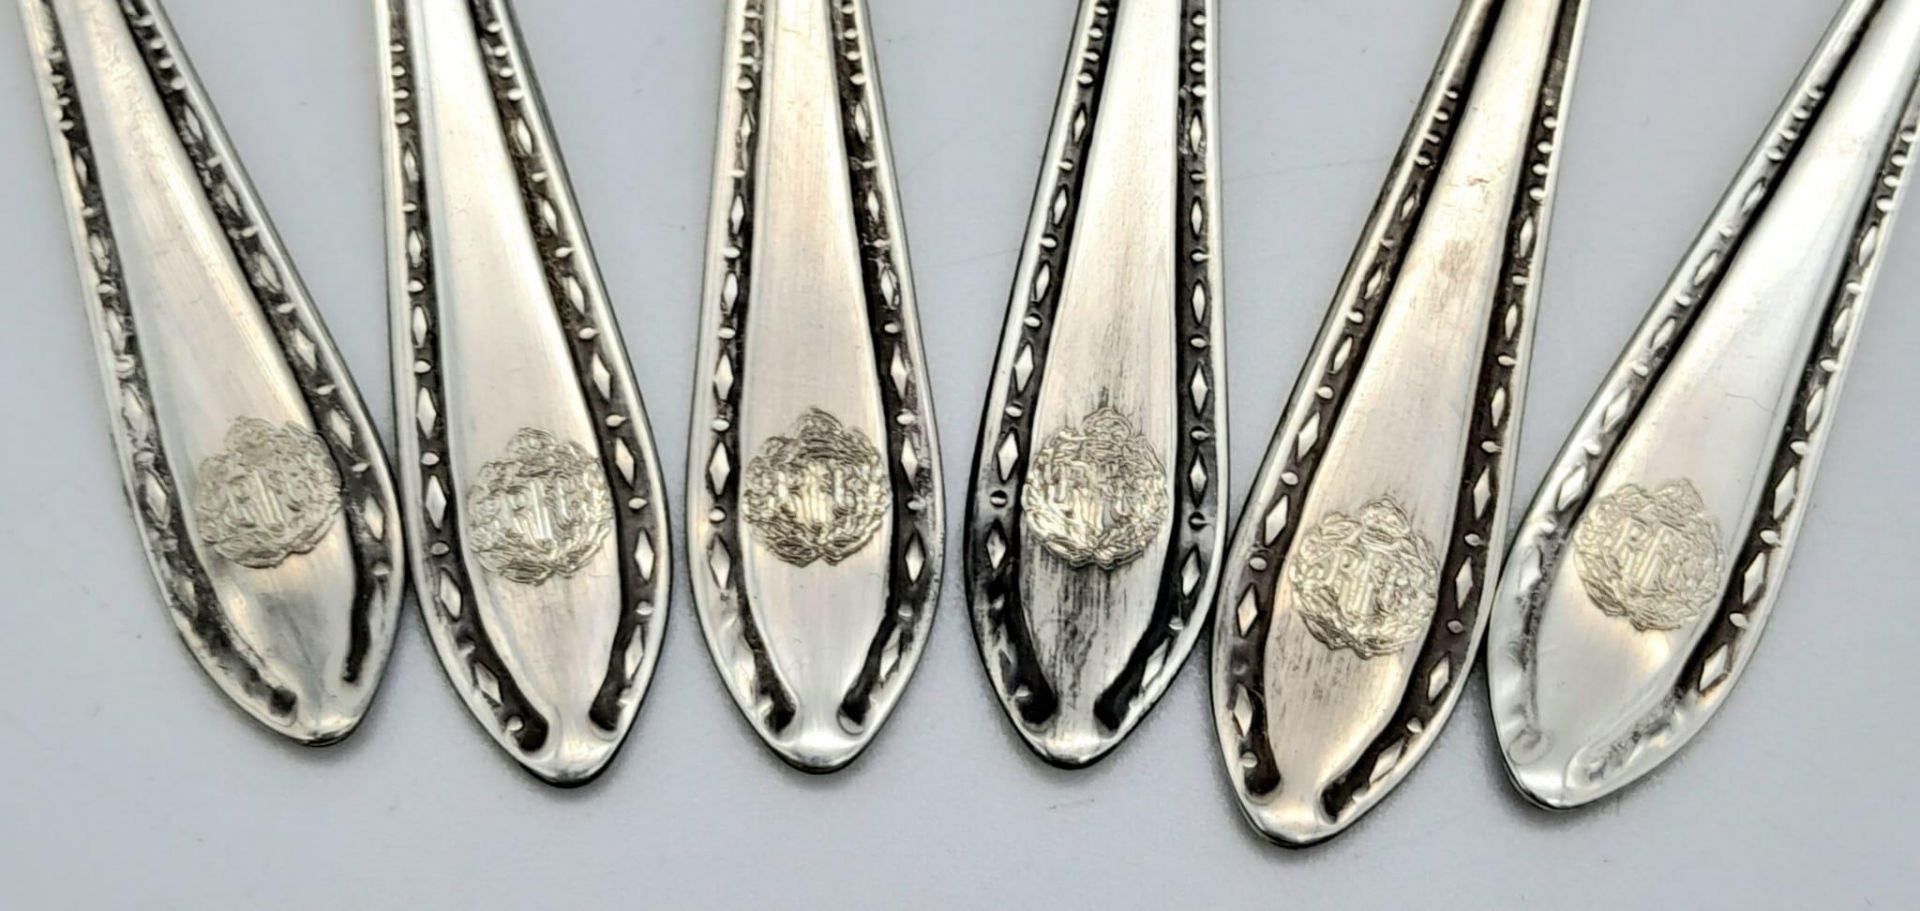 Set of 6 Royal Flying Corps Silver Plated Teaspoons in original case. - Image 4 of 5